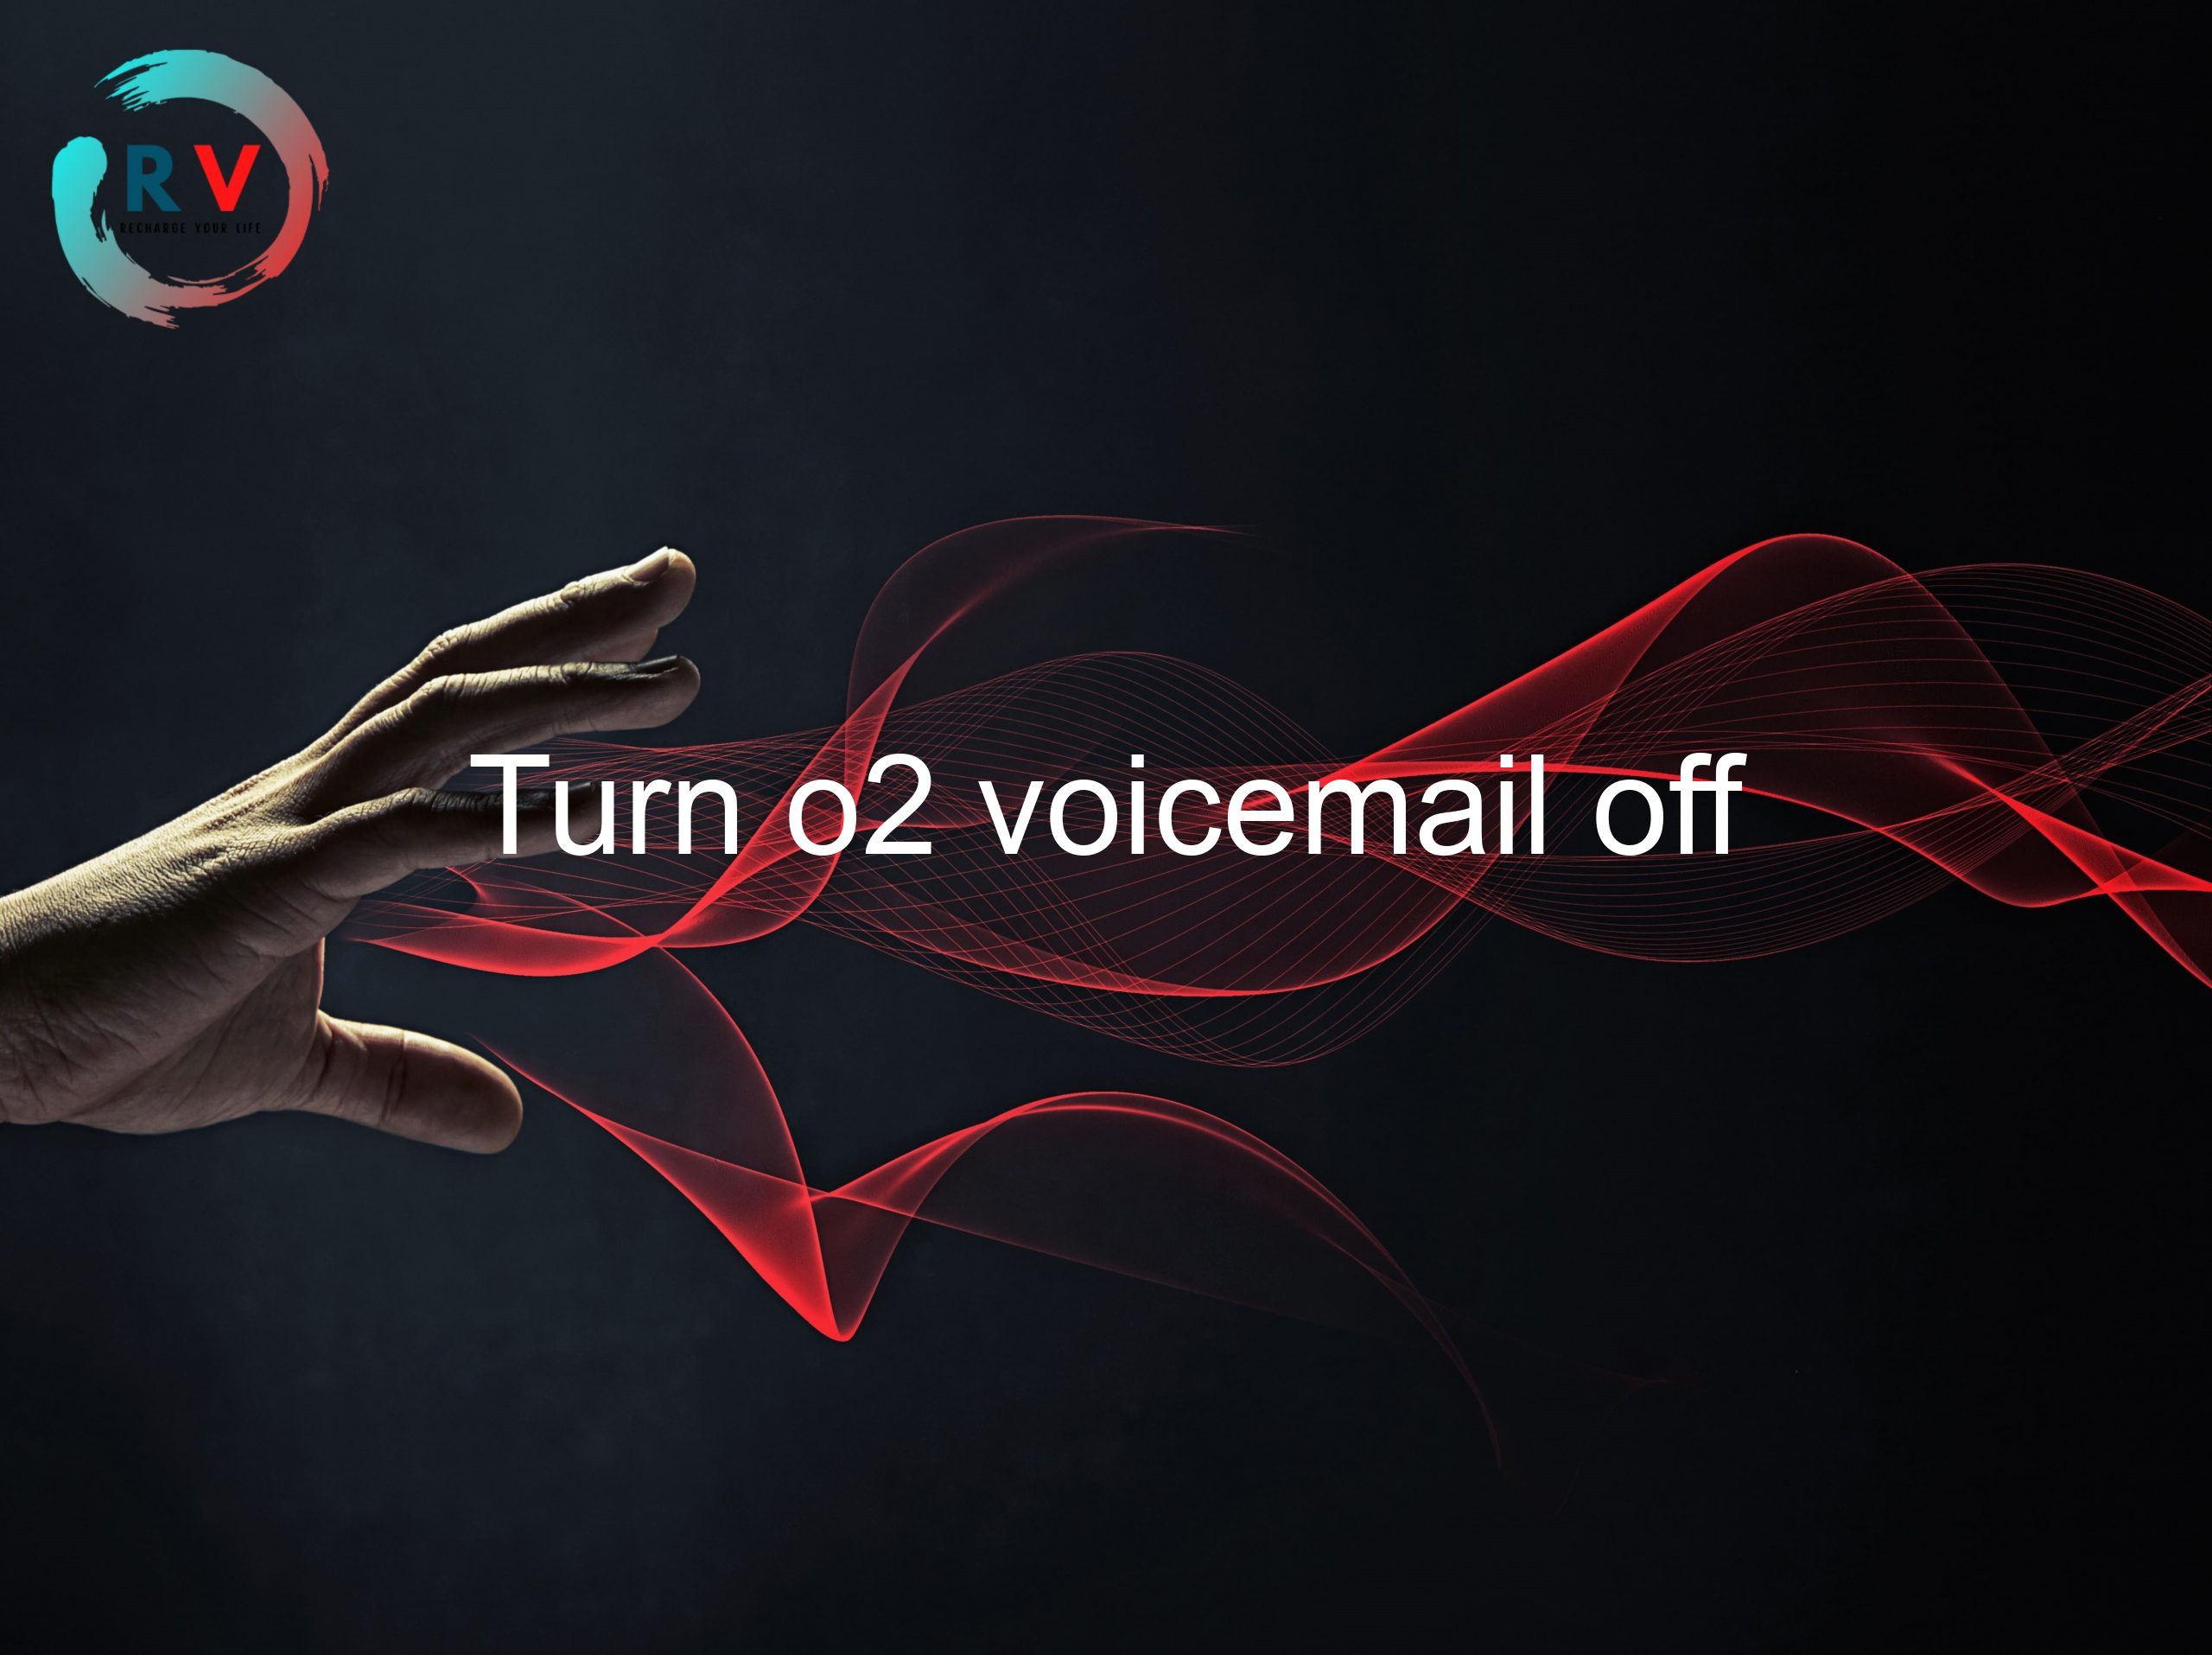 Turn o2 voicemail off